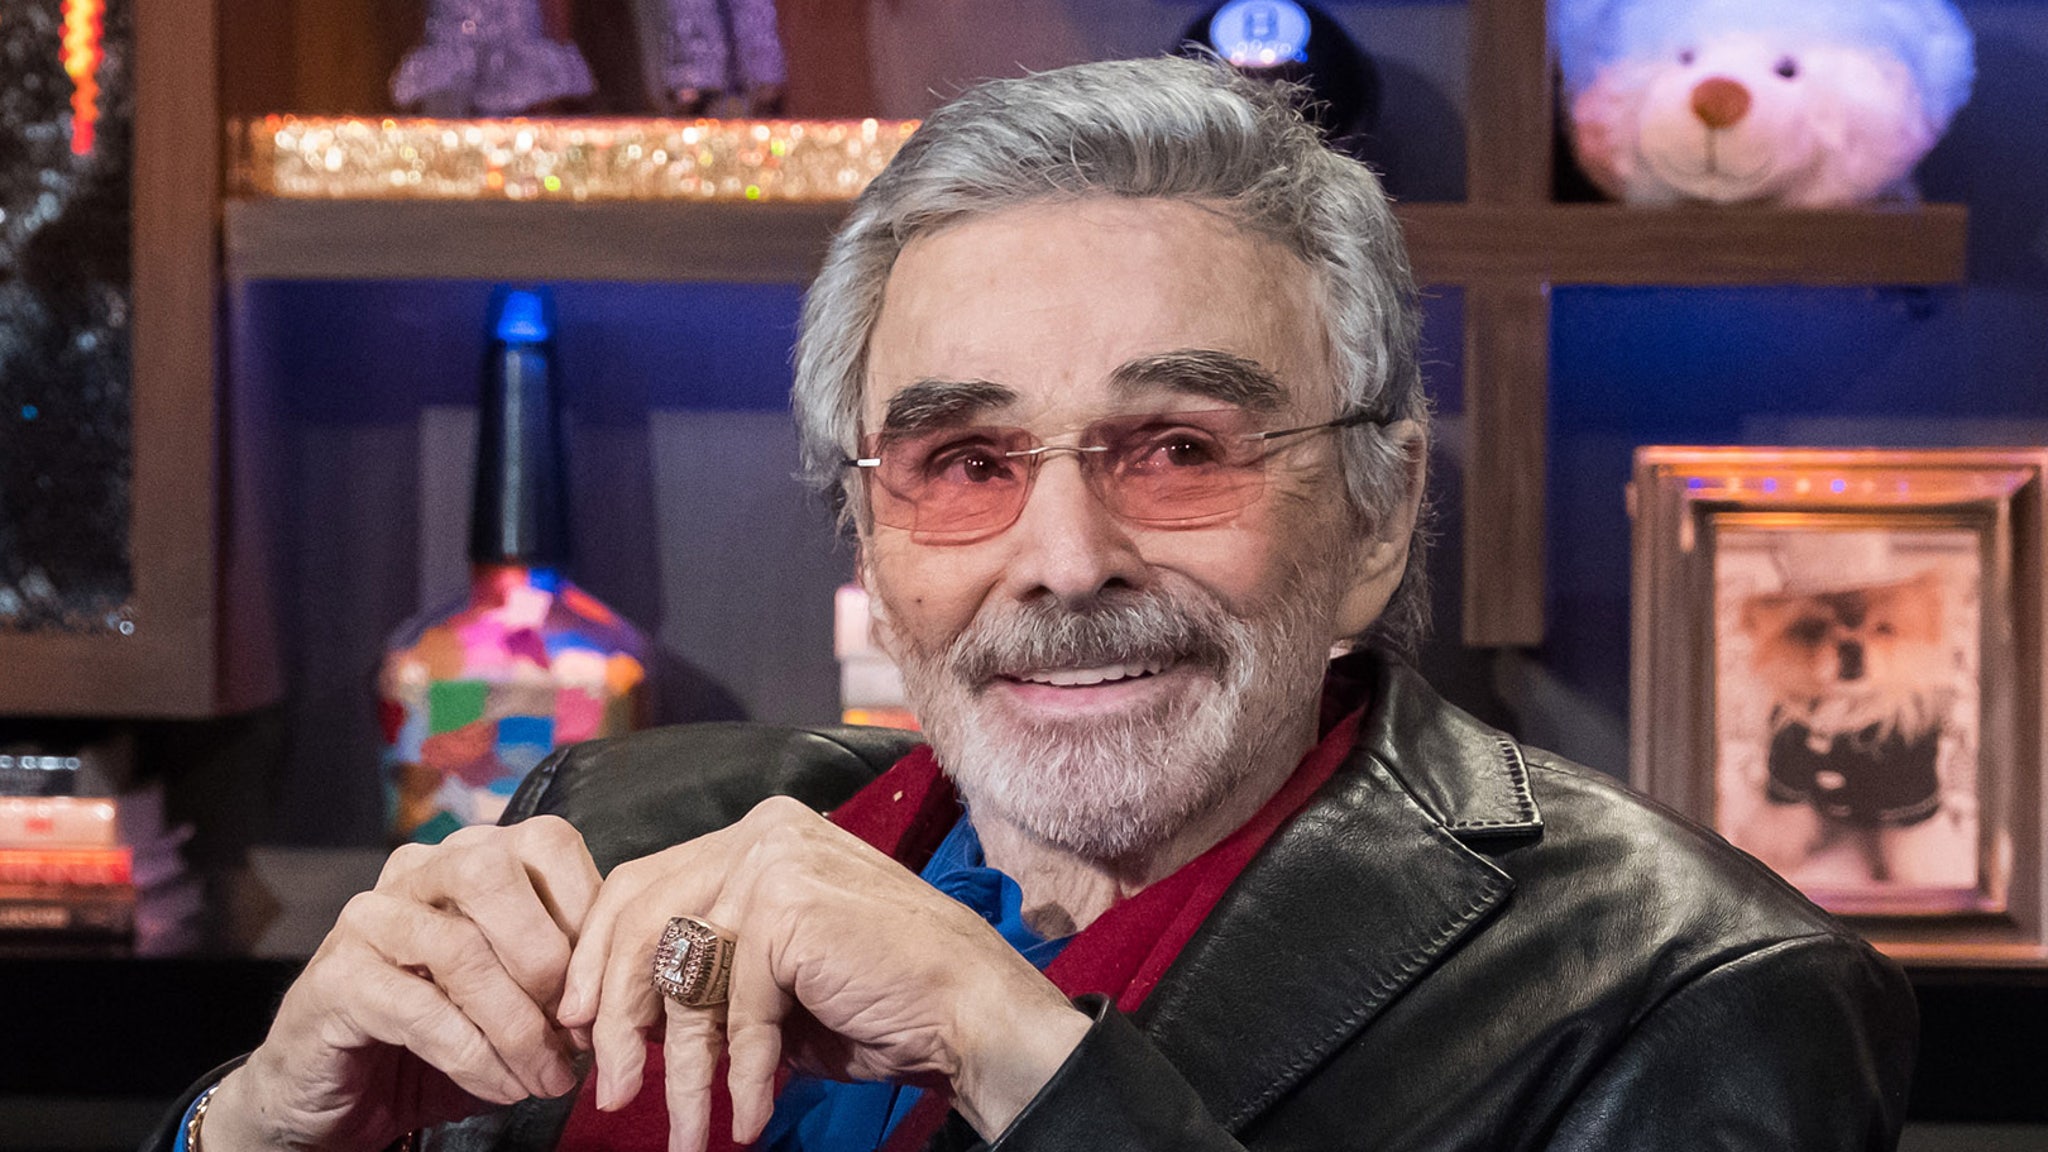 Burt Reynolds Throws Shade at Trump and This 'Overrated' Actress on 'WWHL'